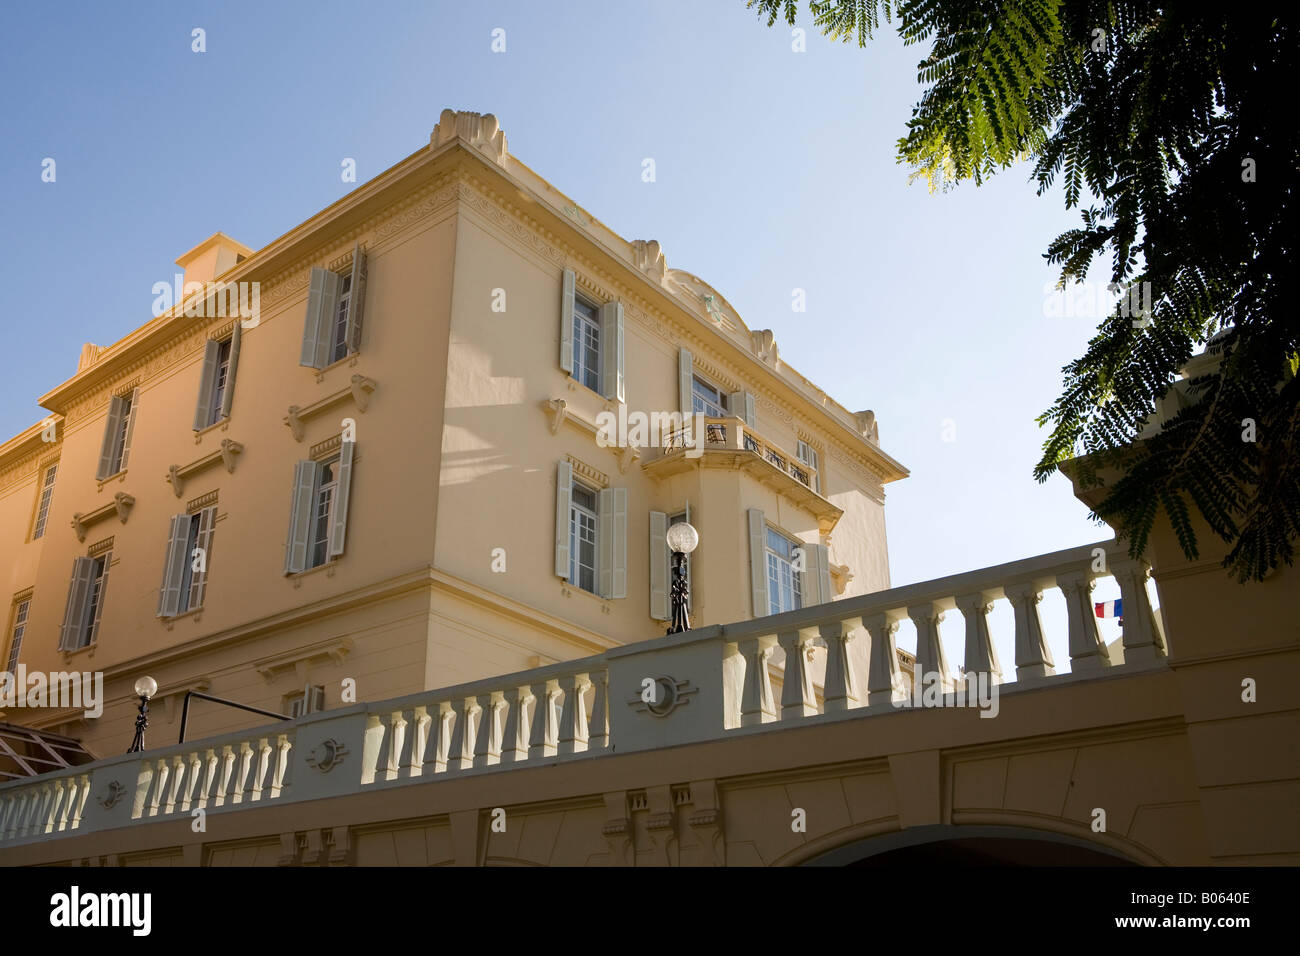 The Old Winter Palace Hotel, Luxor Egypt Stock Photo